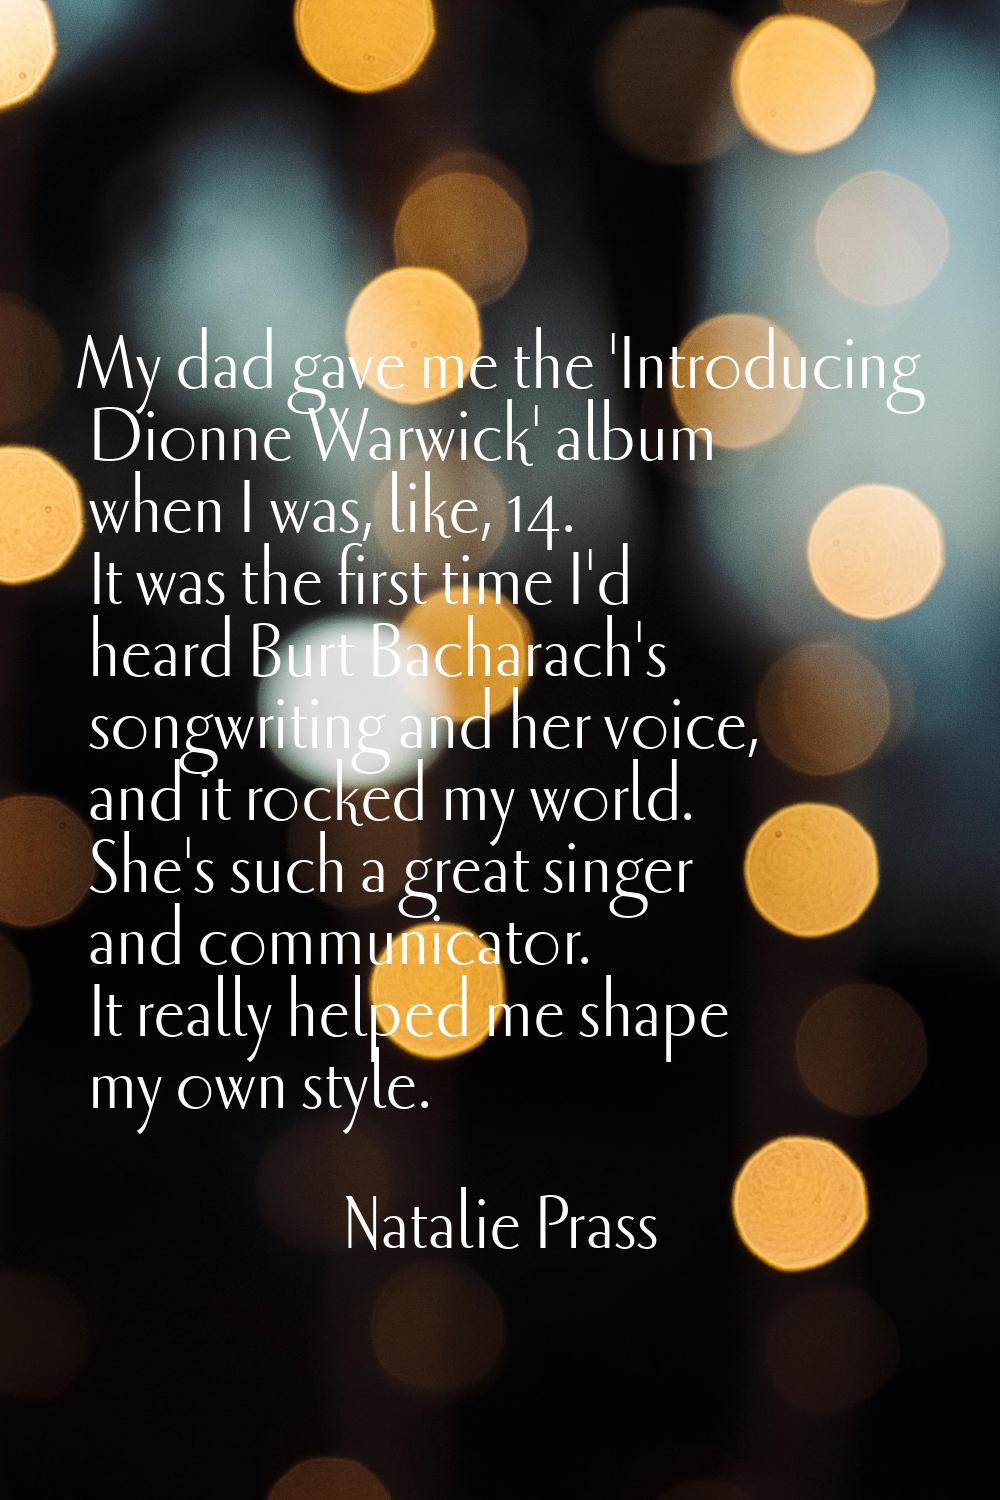 My dad gave me the 'Introducing Dionne Warwick' album when I was, like, 14. It was the first time I